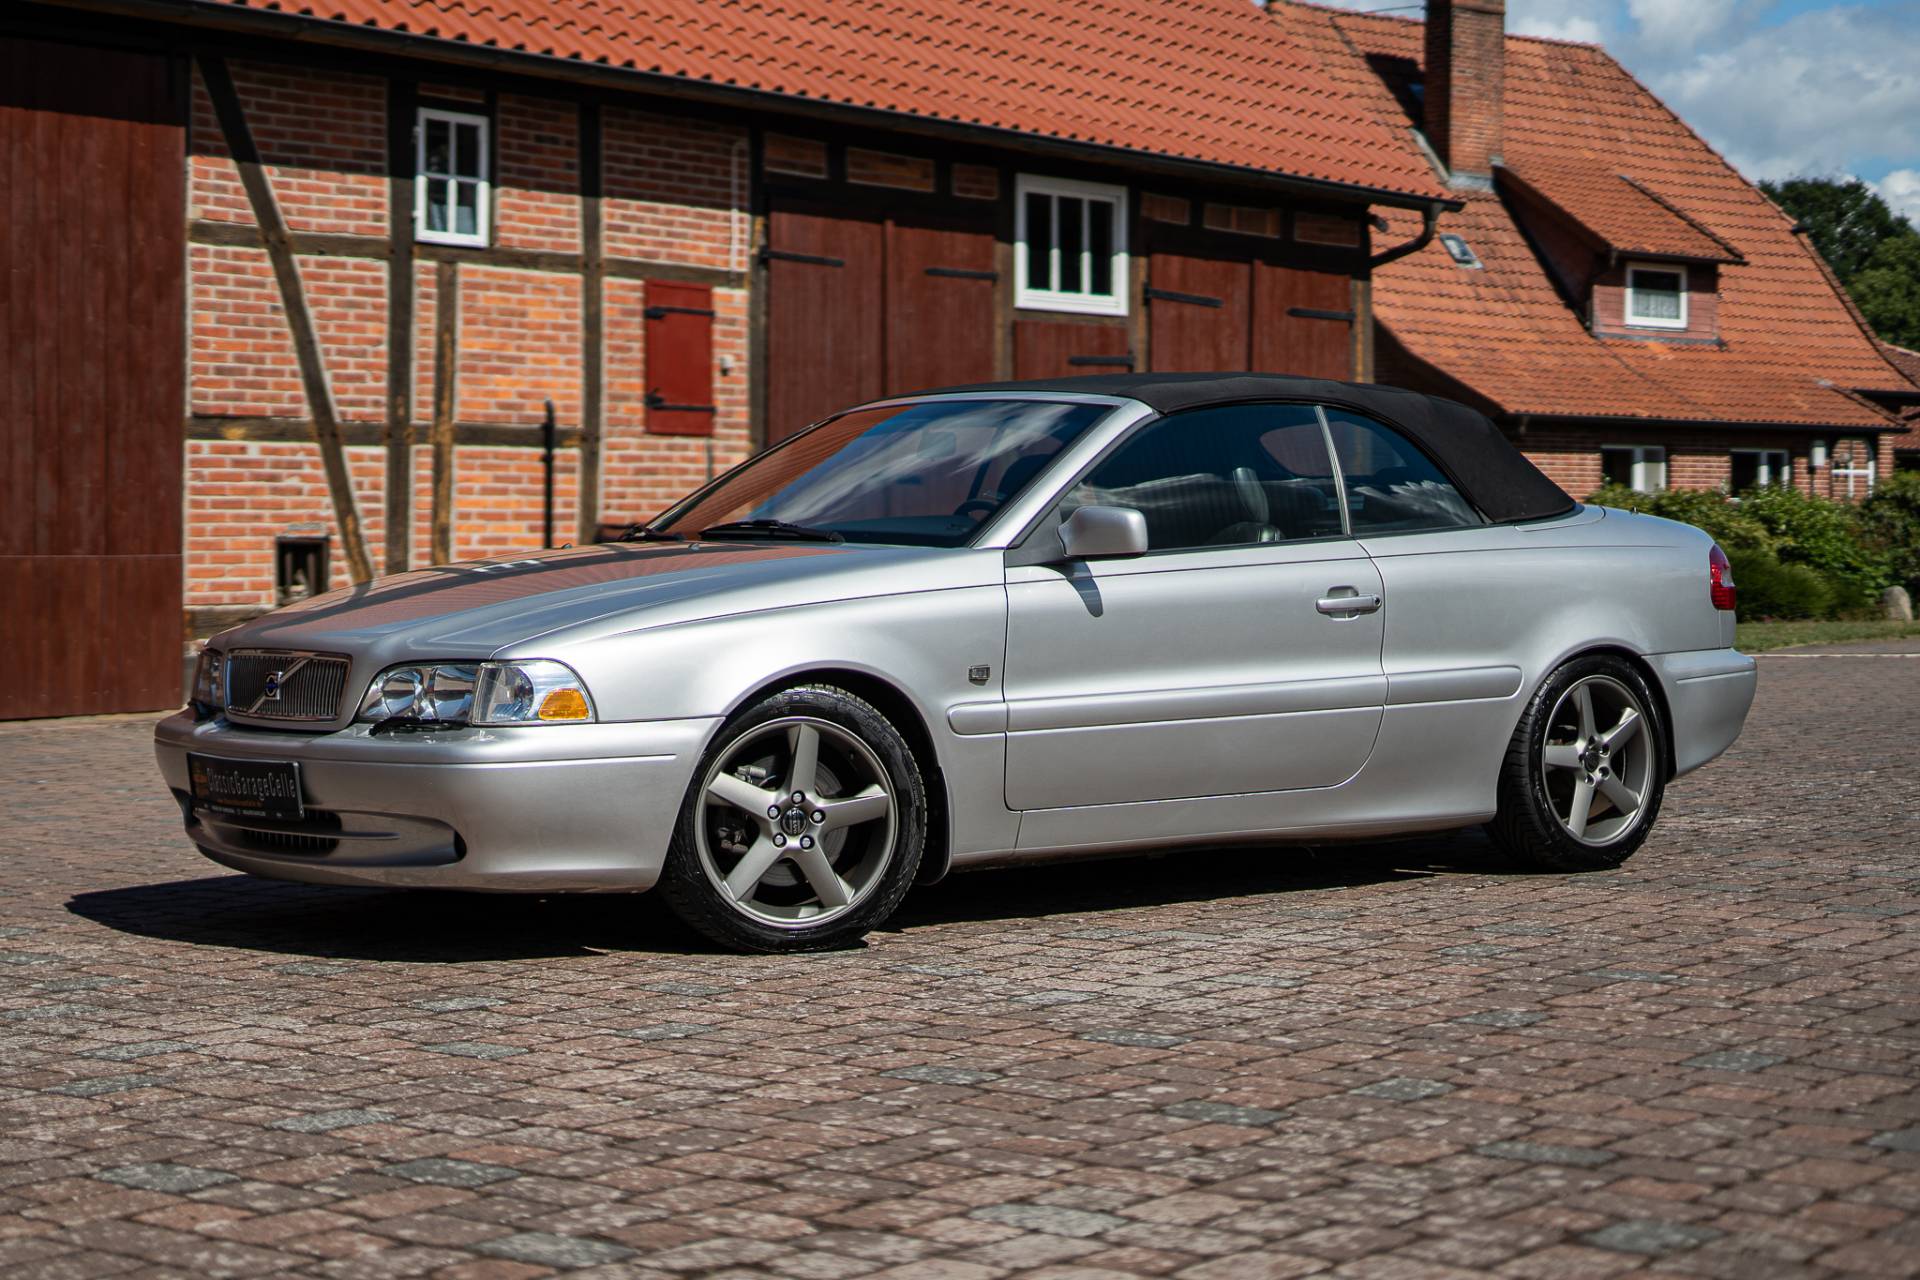 For Sale: Volvo C70 2.0 T (2003) offered for GBP 12,207